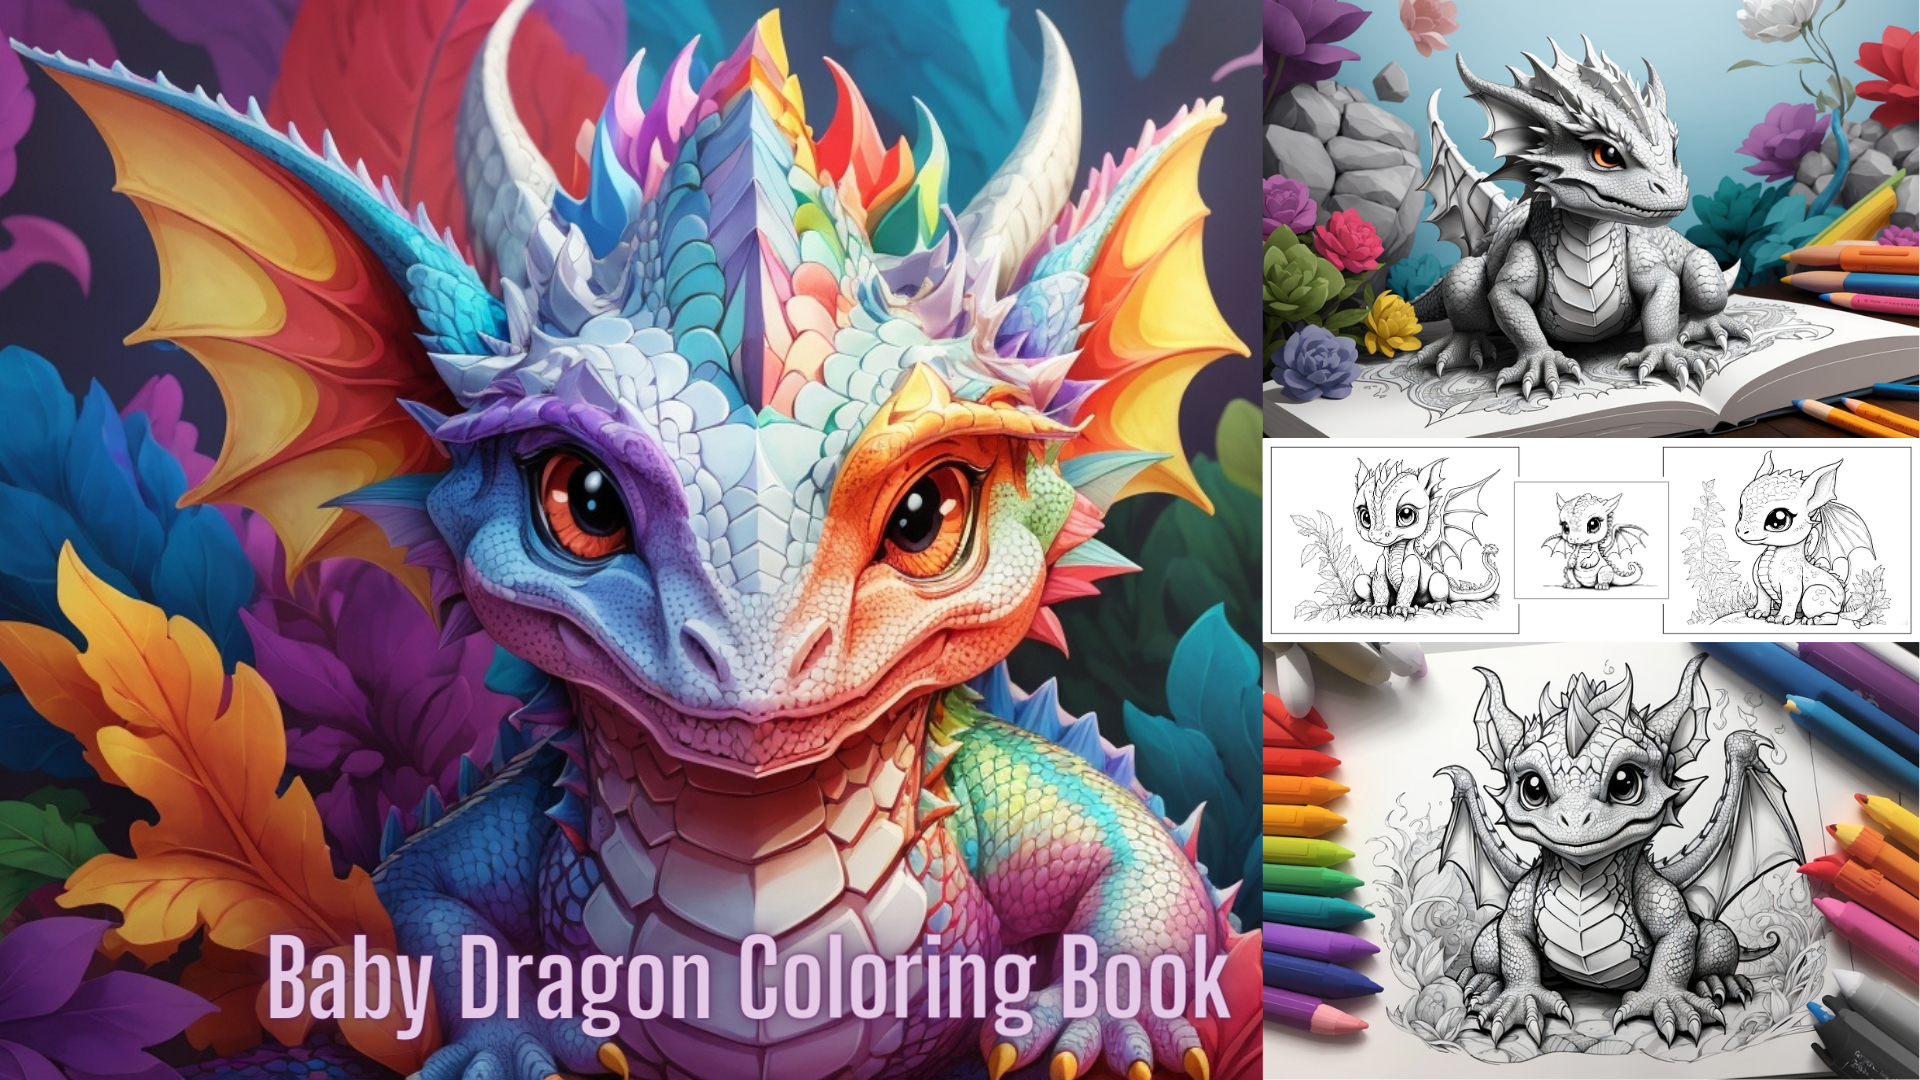 100 Baby Dragon Coloring Pages, Fantasy, Adults and Kids Coloring Book,  Digital Coloring Sheets, Instant Download, Printable PDF File. 